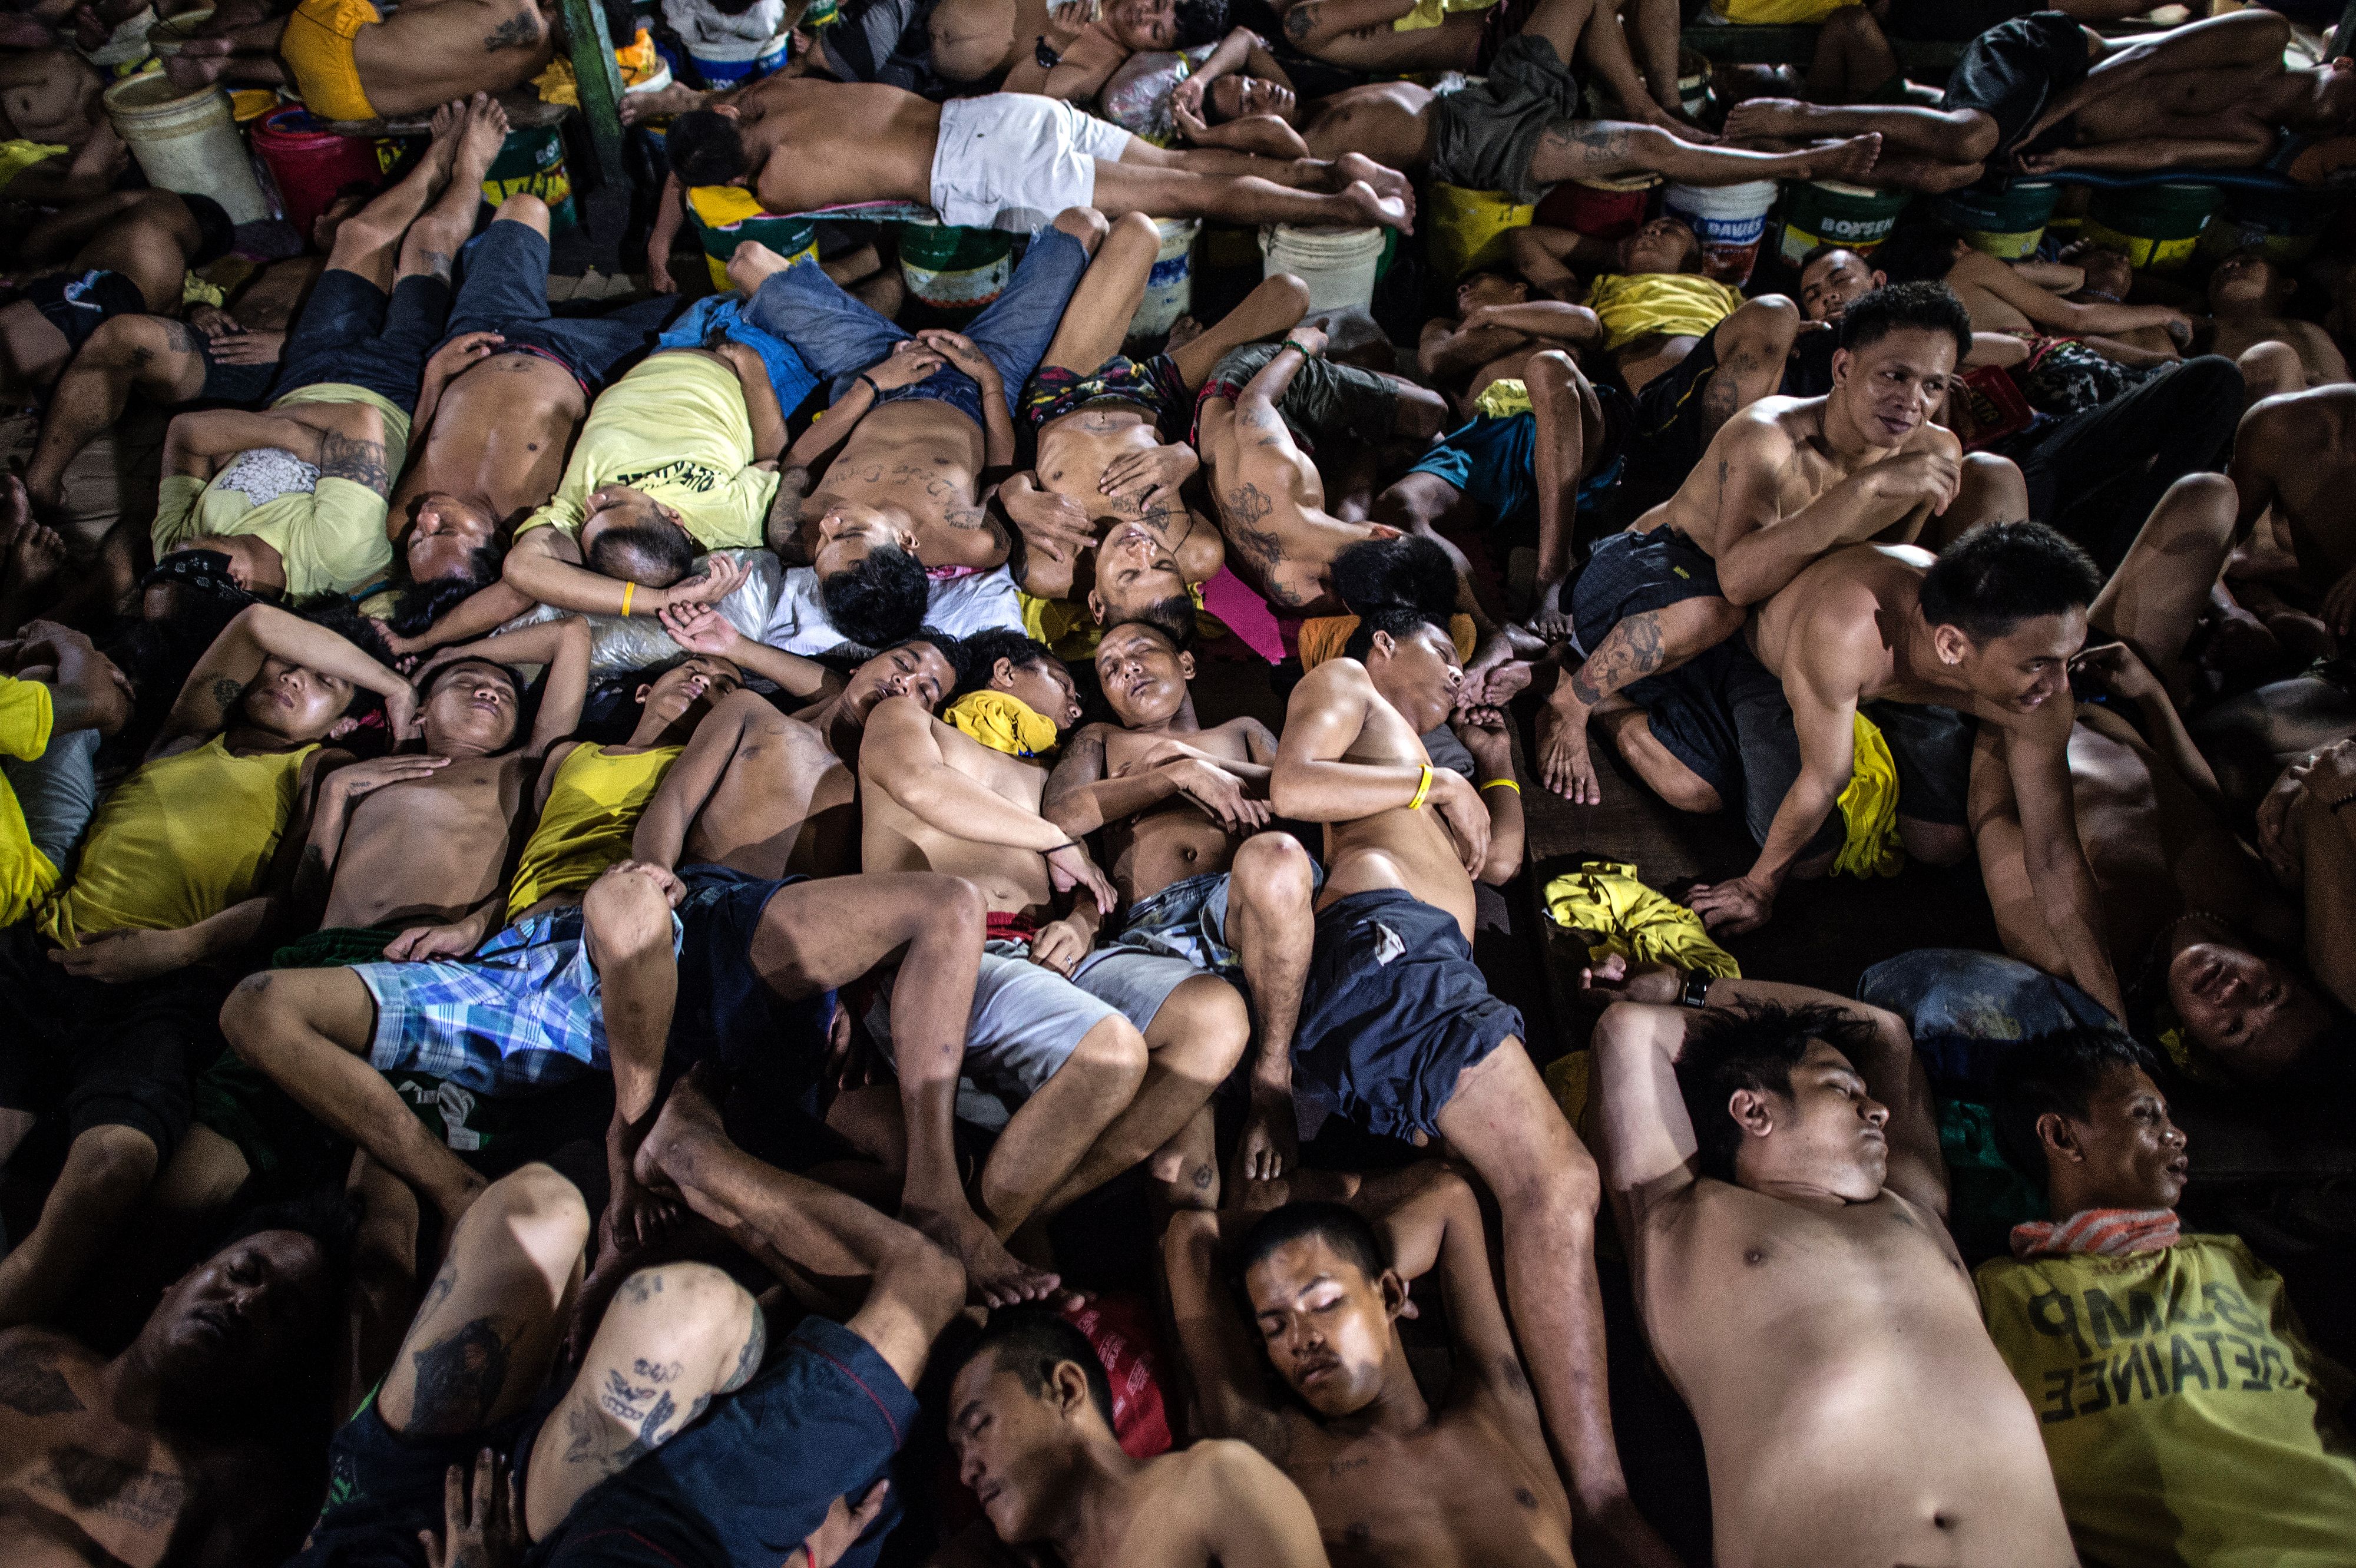 This picture taken on July 21, 2016, shows inmates sleeping inside the Quezon City jail in Manila. Philippine officials said on Aug. 9, 2016, the government would build new jails to address severe congestion made worse by President Rodrigo Duterte's drug war, describing conditions as 